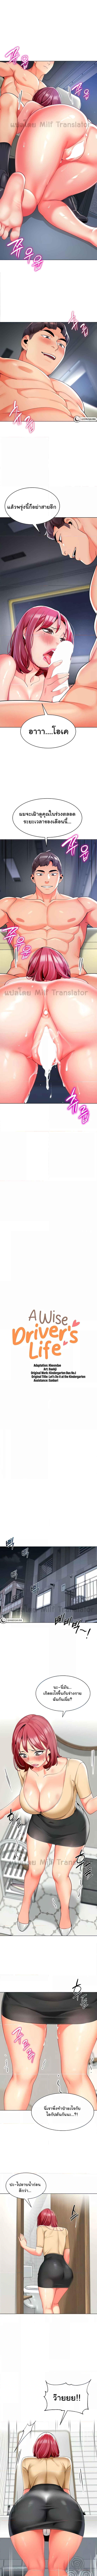 A Wise Driver’s Life 20 1